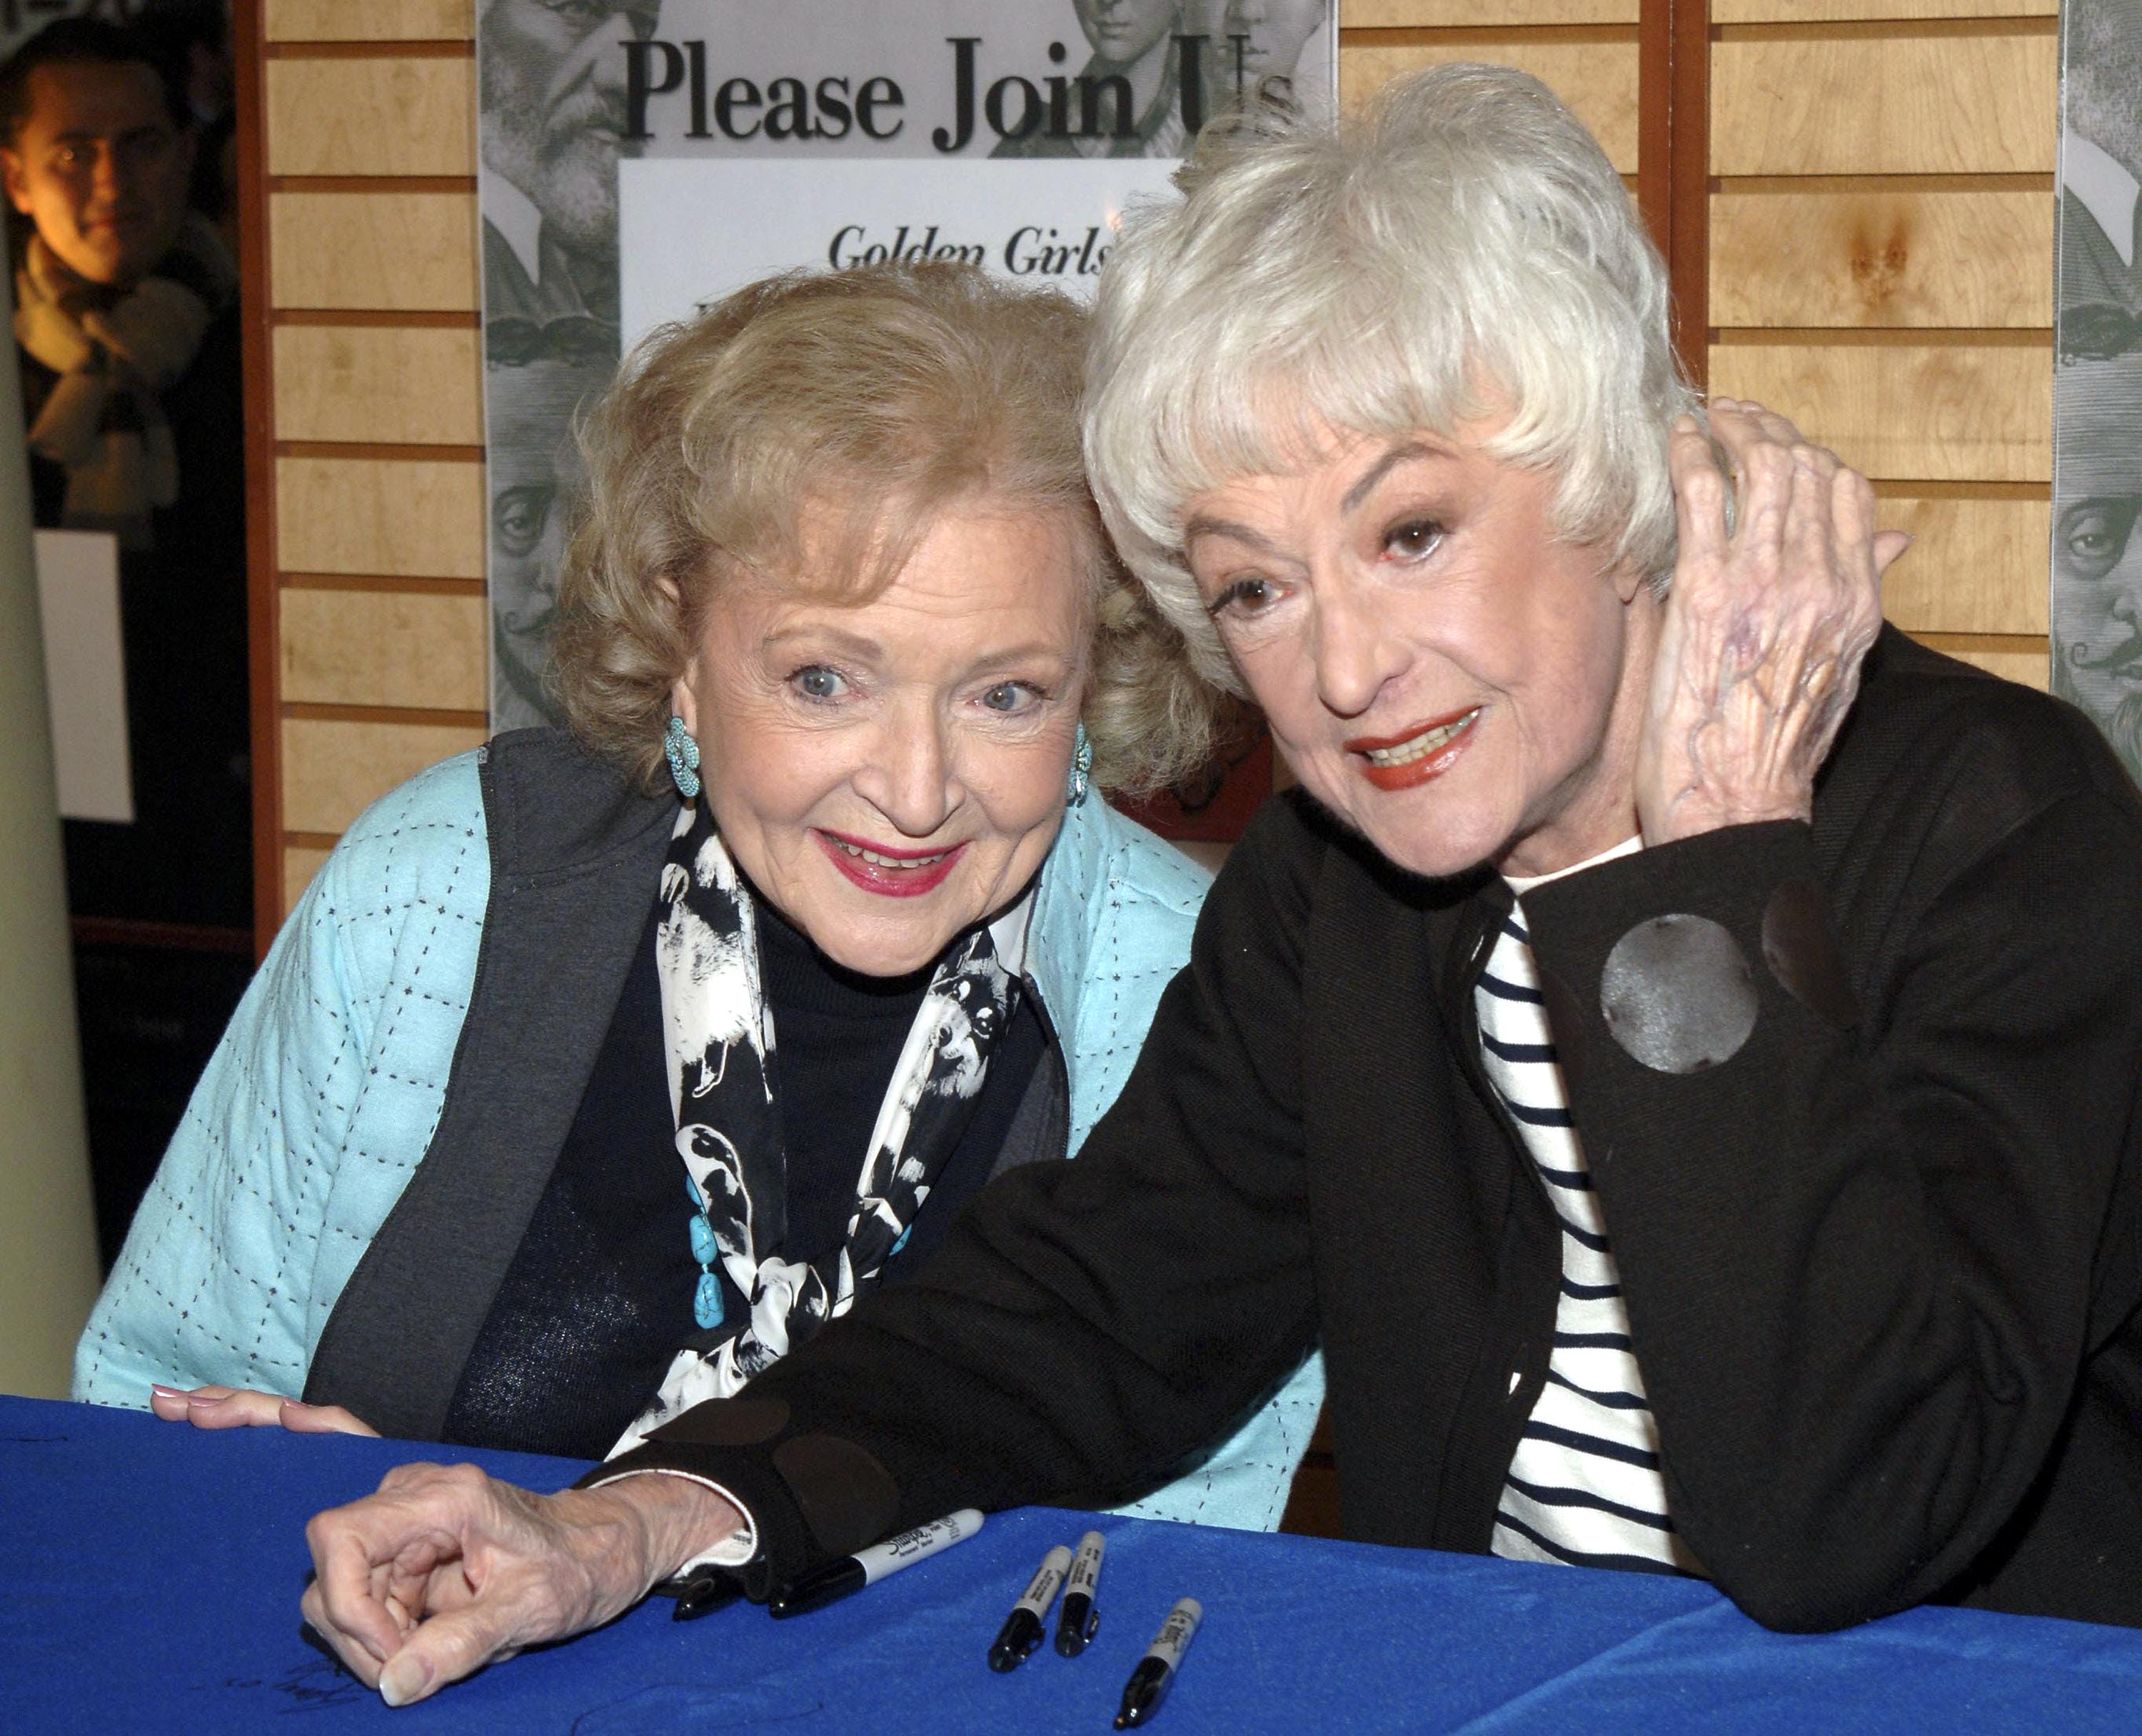 Betty White and Bea Arthur sign copies of "The Golden Girls Season 3" in New York City on November 22, 2005 | Photo: Getty Images